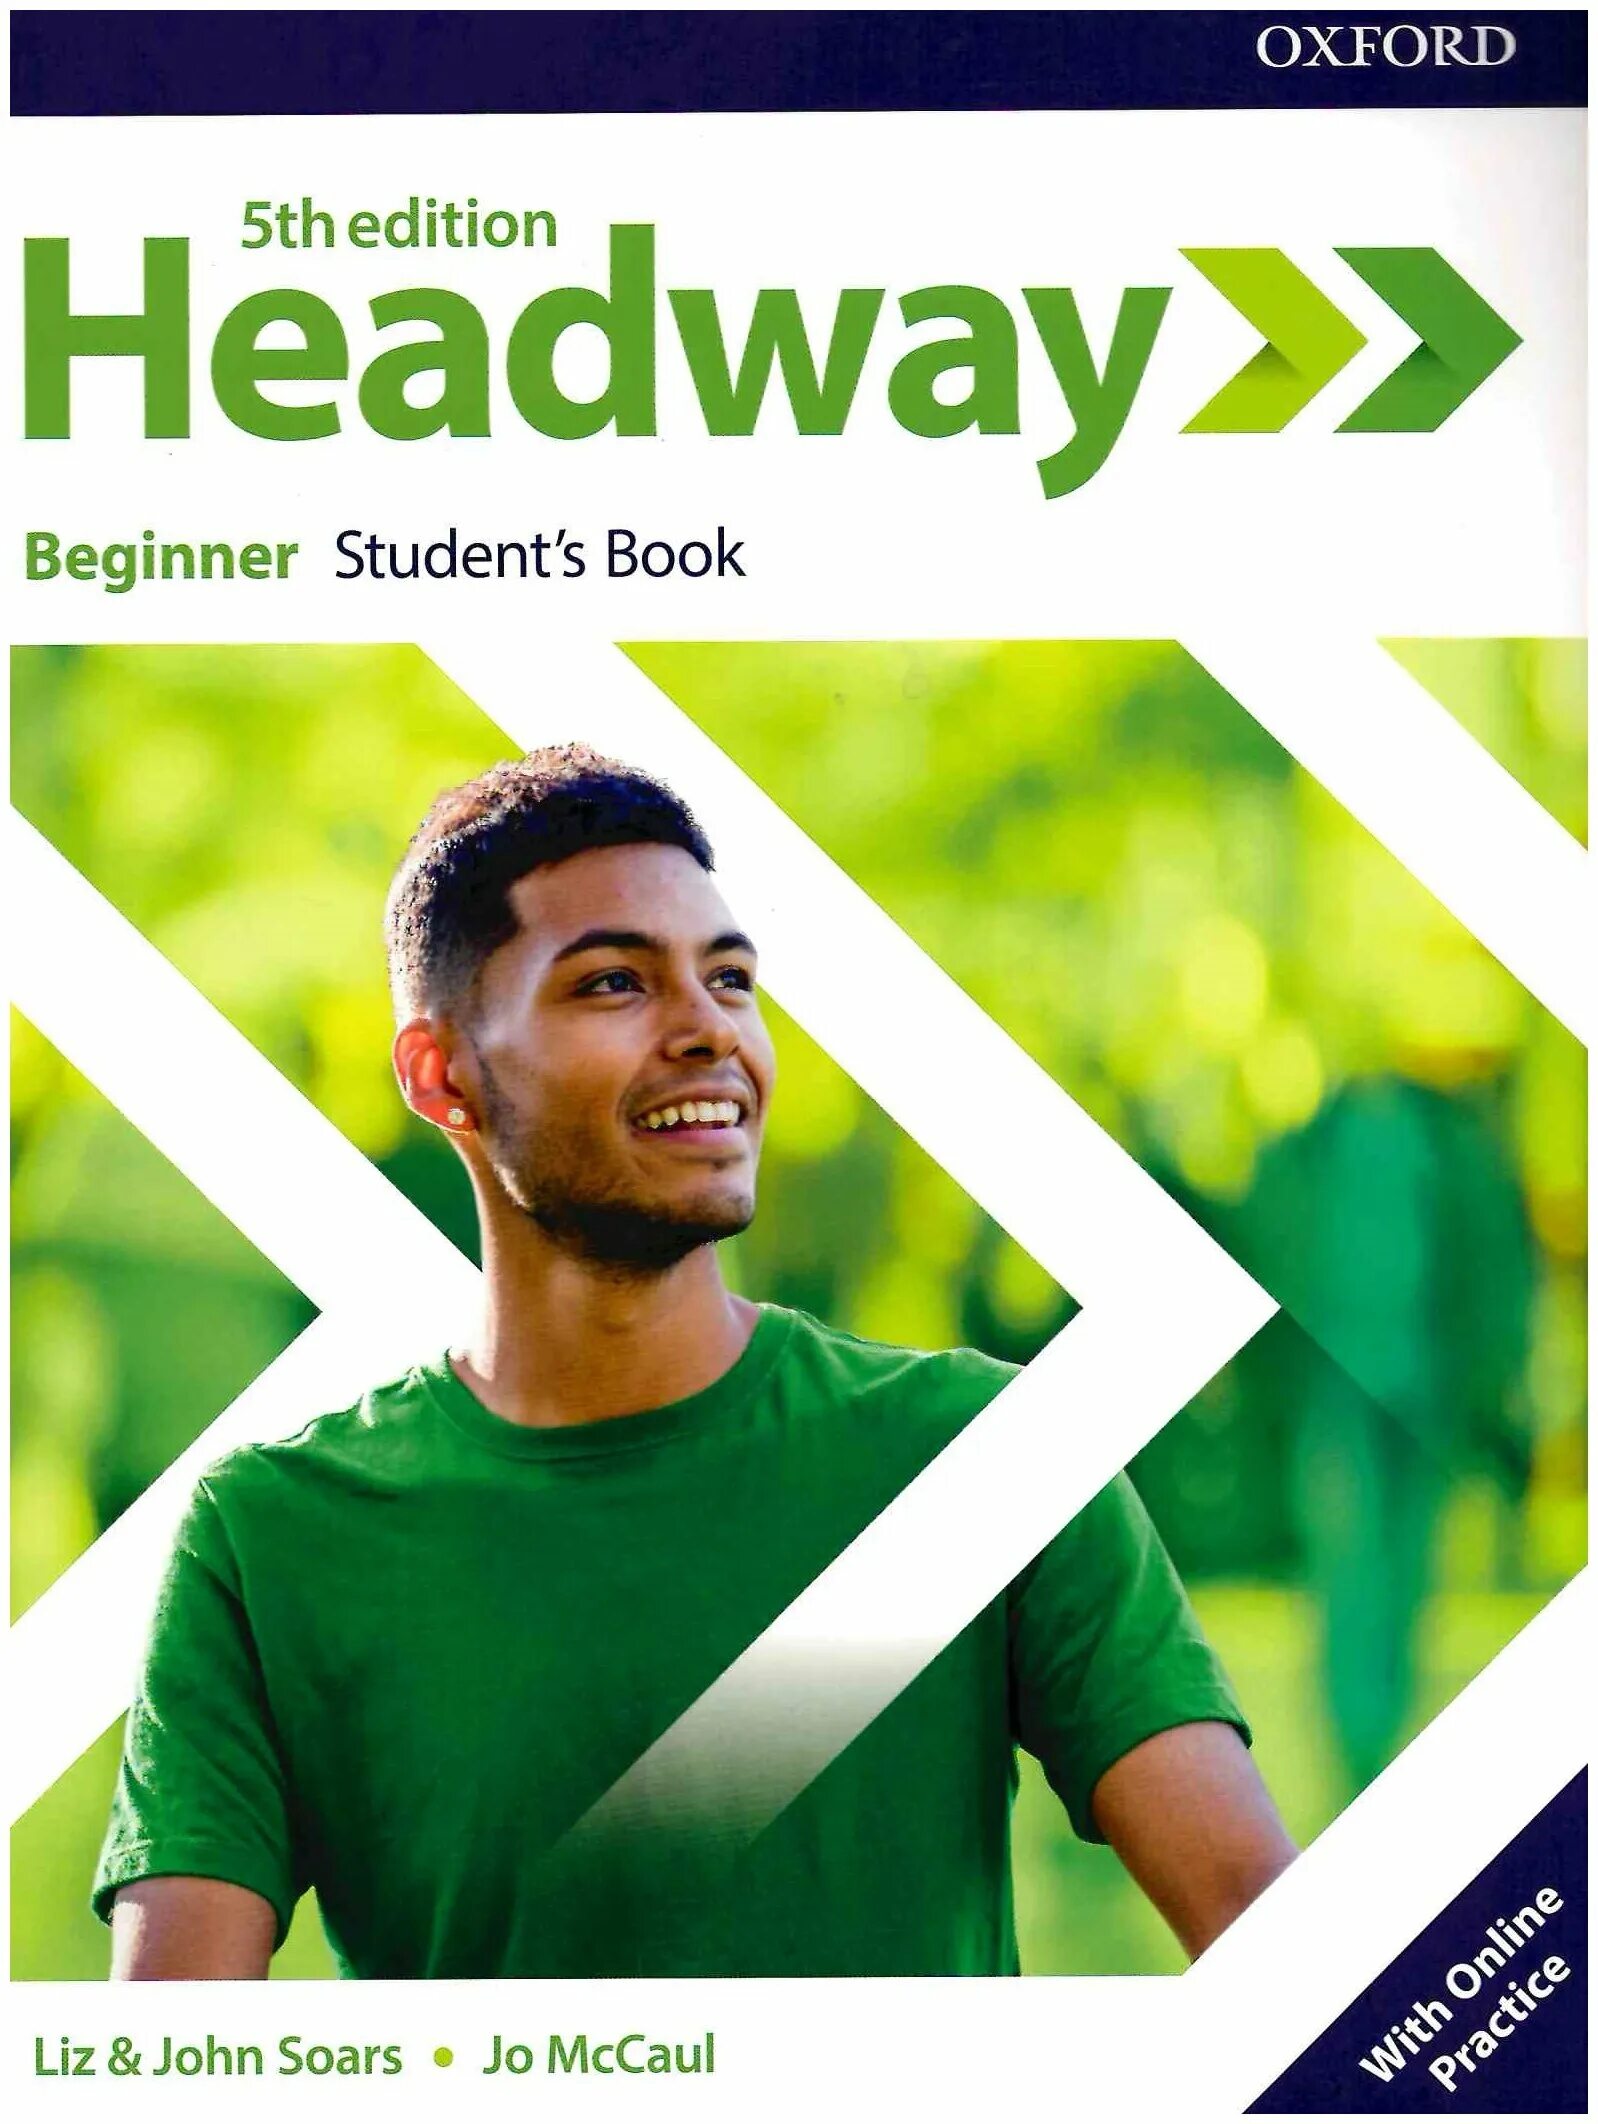 Headway Beginner 5th Edition book Cover. New Headway Beginner student's book 5th Edition. New Headway Beginner 5 th students book. New Headway Beginner 5th Edition. New headway 5th edition